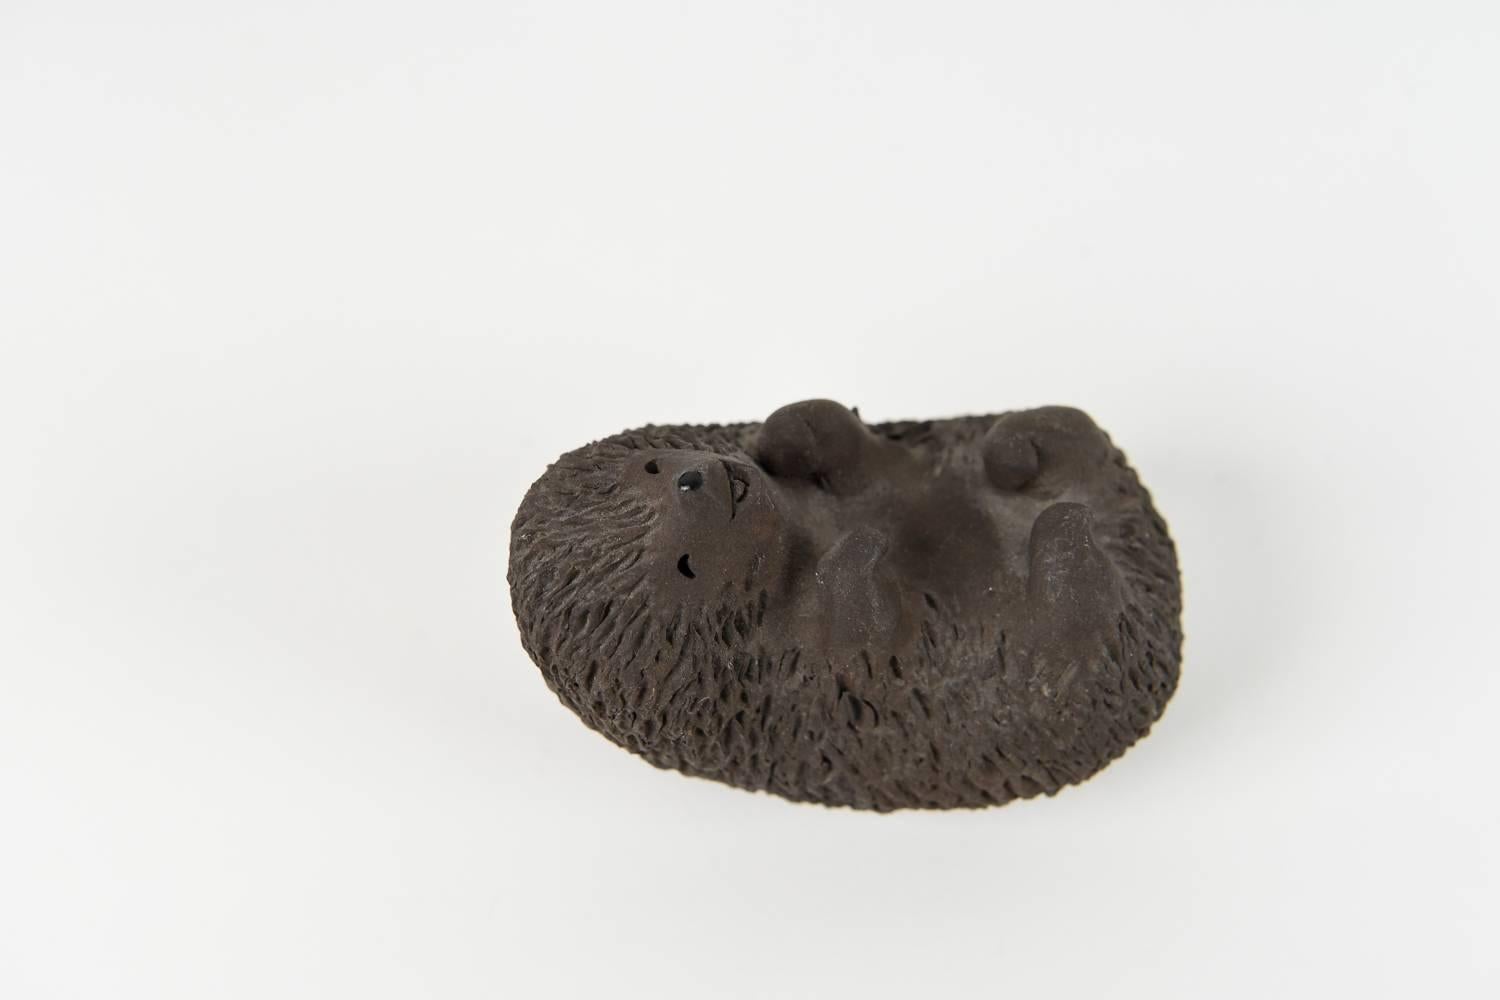 A set of five adorable hedgehogs by Ellen Karlsen. These hedgehogs would be a fun addition to any room, bringing in a delightful touch of nature.